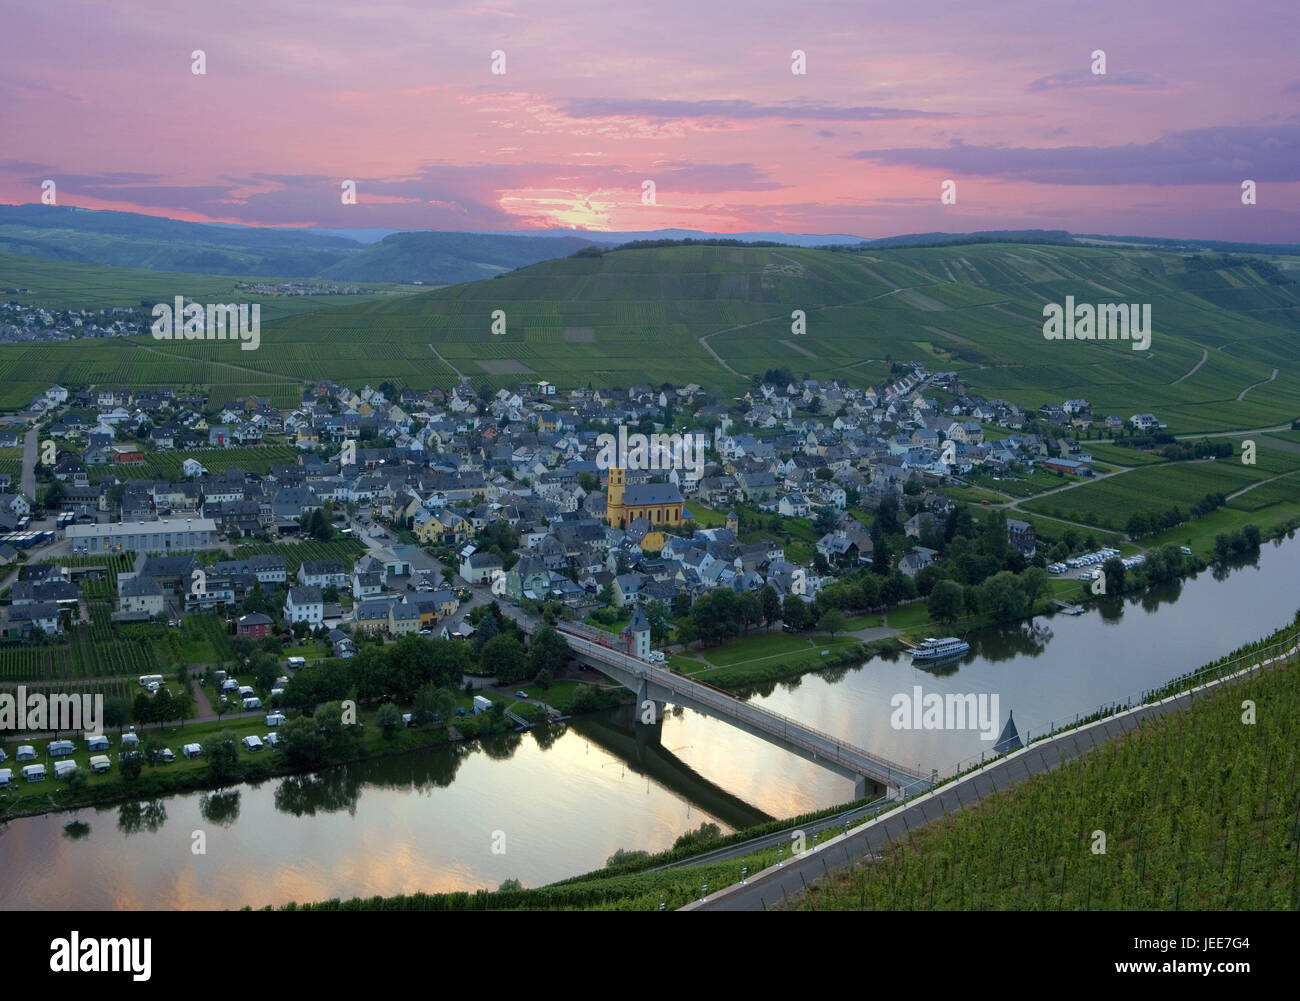 Germany, Rhineland-Palatinate, step home, town view, church, flux Moselle, afterglow, Moselle valley, mirroring, water surface, wine region, wine-growing area, vineyards, hills, view, town, houses, residential houses, bridge, sky, evening sky, atmospheric, Stock Photo